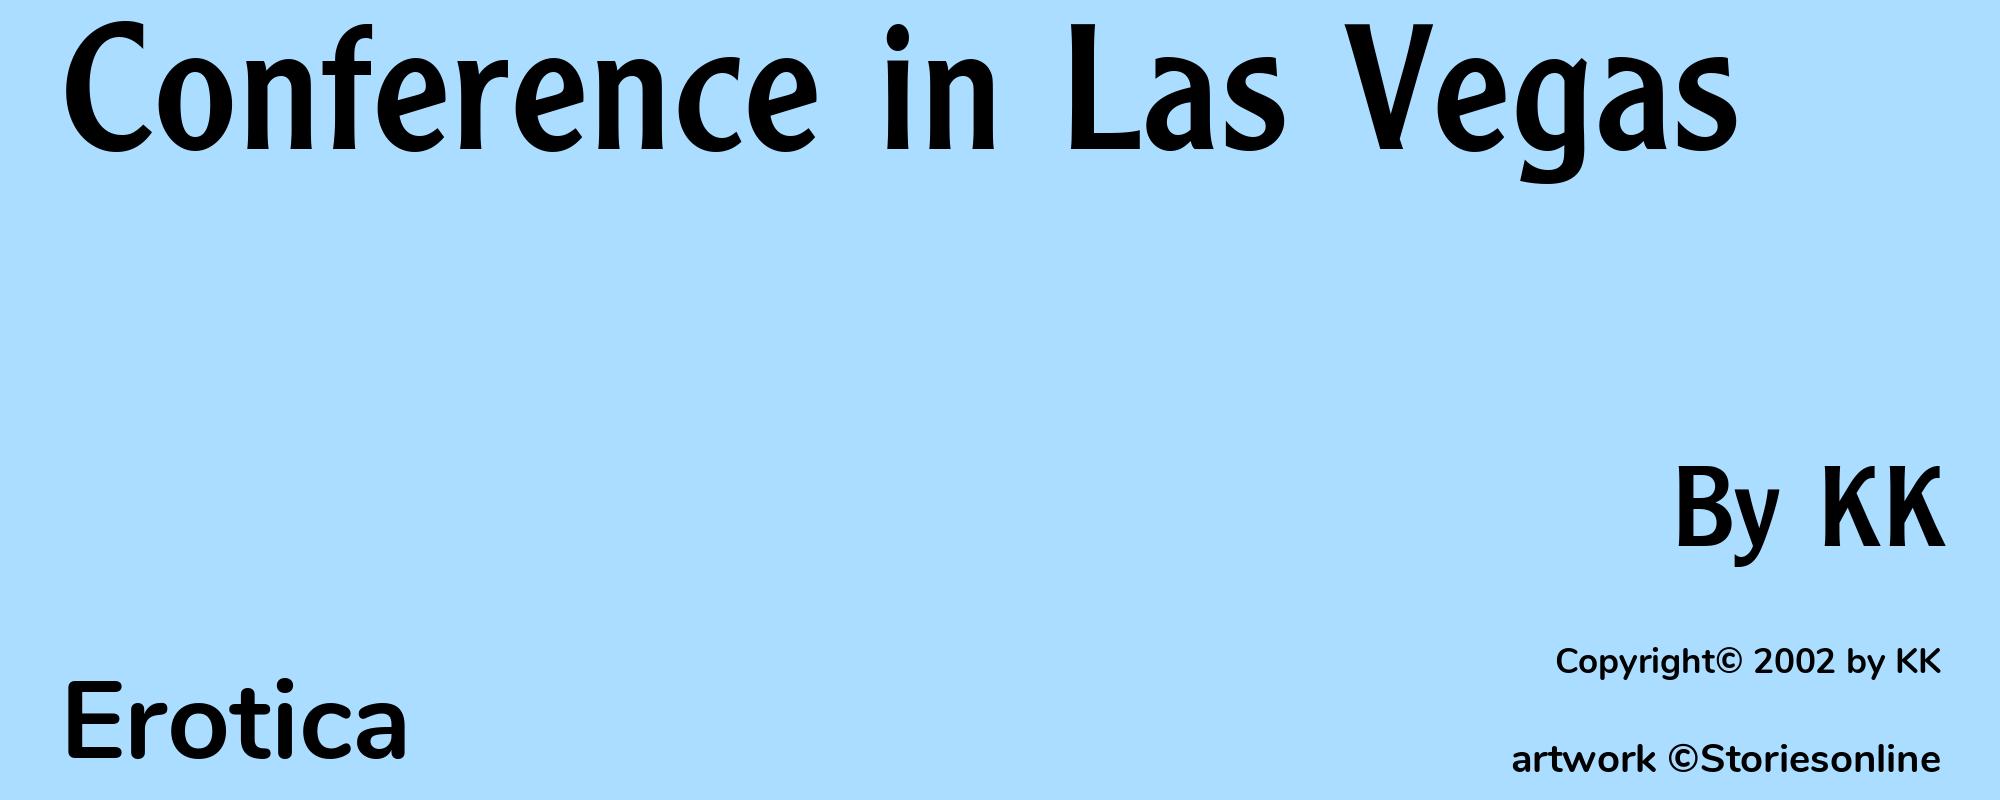 Conference in Las Vegas - Cover